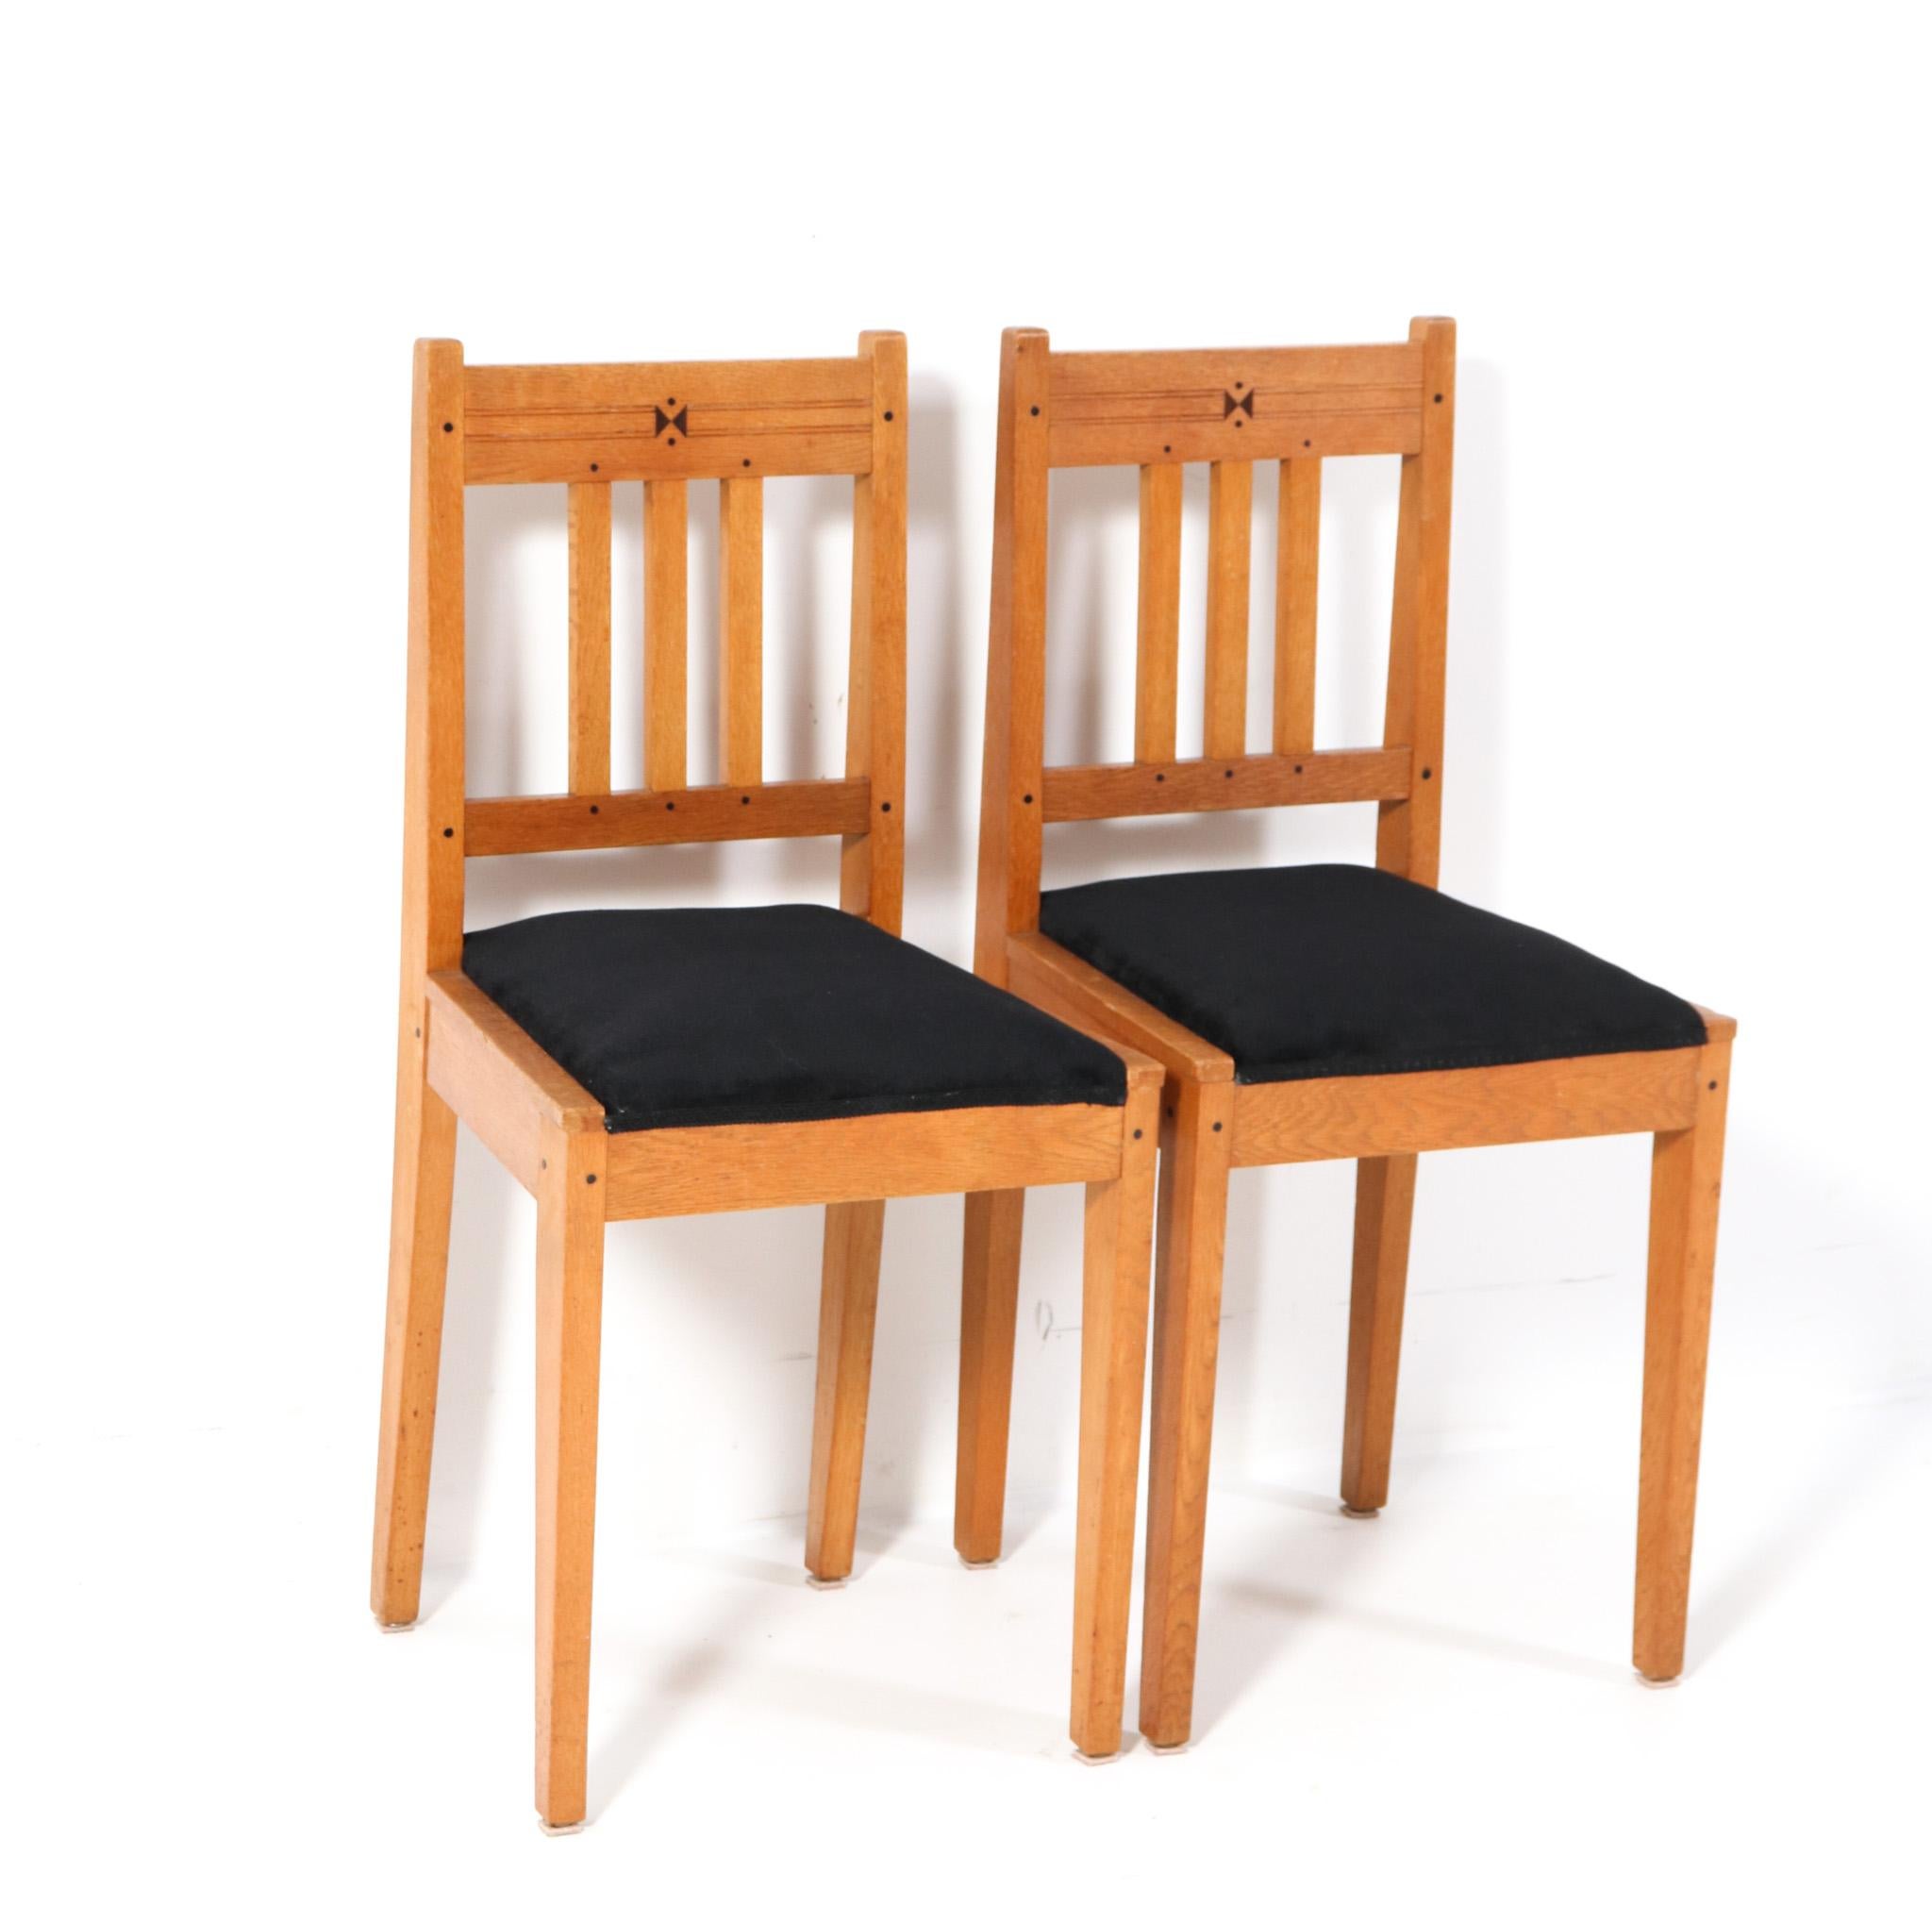 Early 20th Century Pair of Oak Arts & Crafts Art Nouveau Side Chairs by Jac. van den Bosch, 1904 For Sale